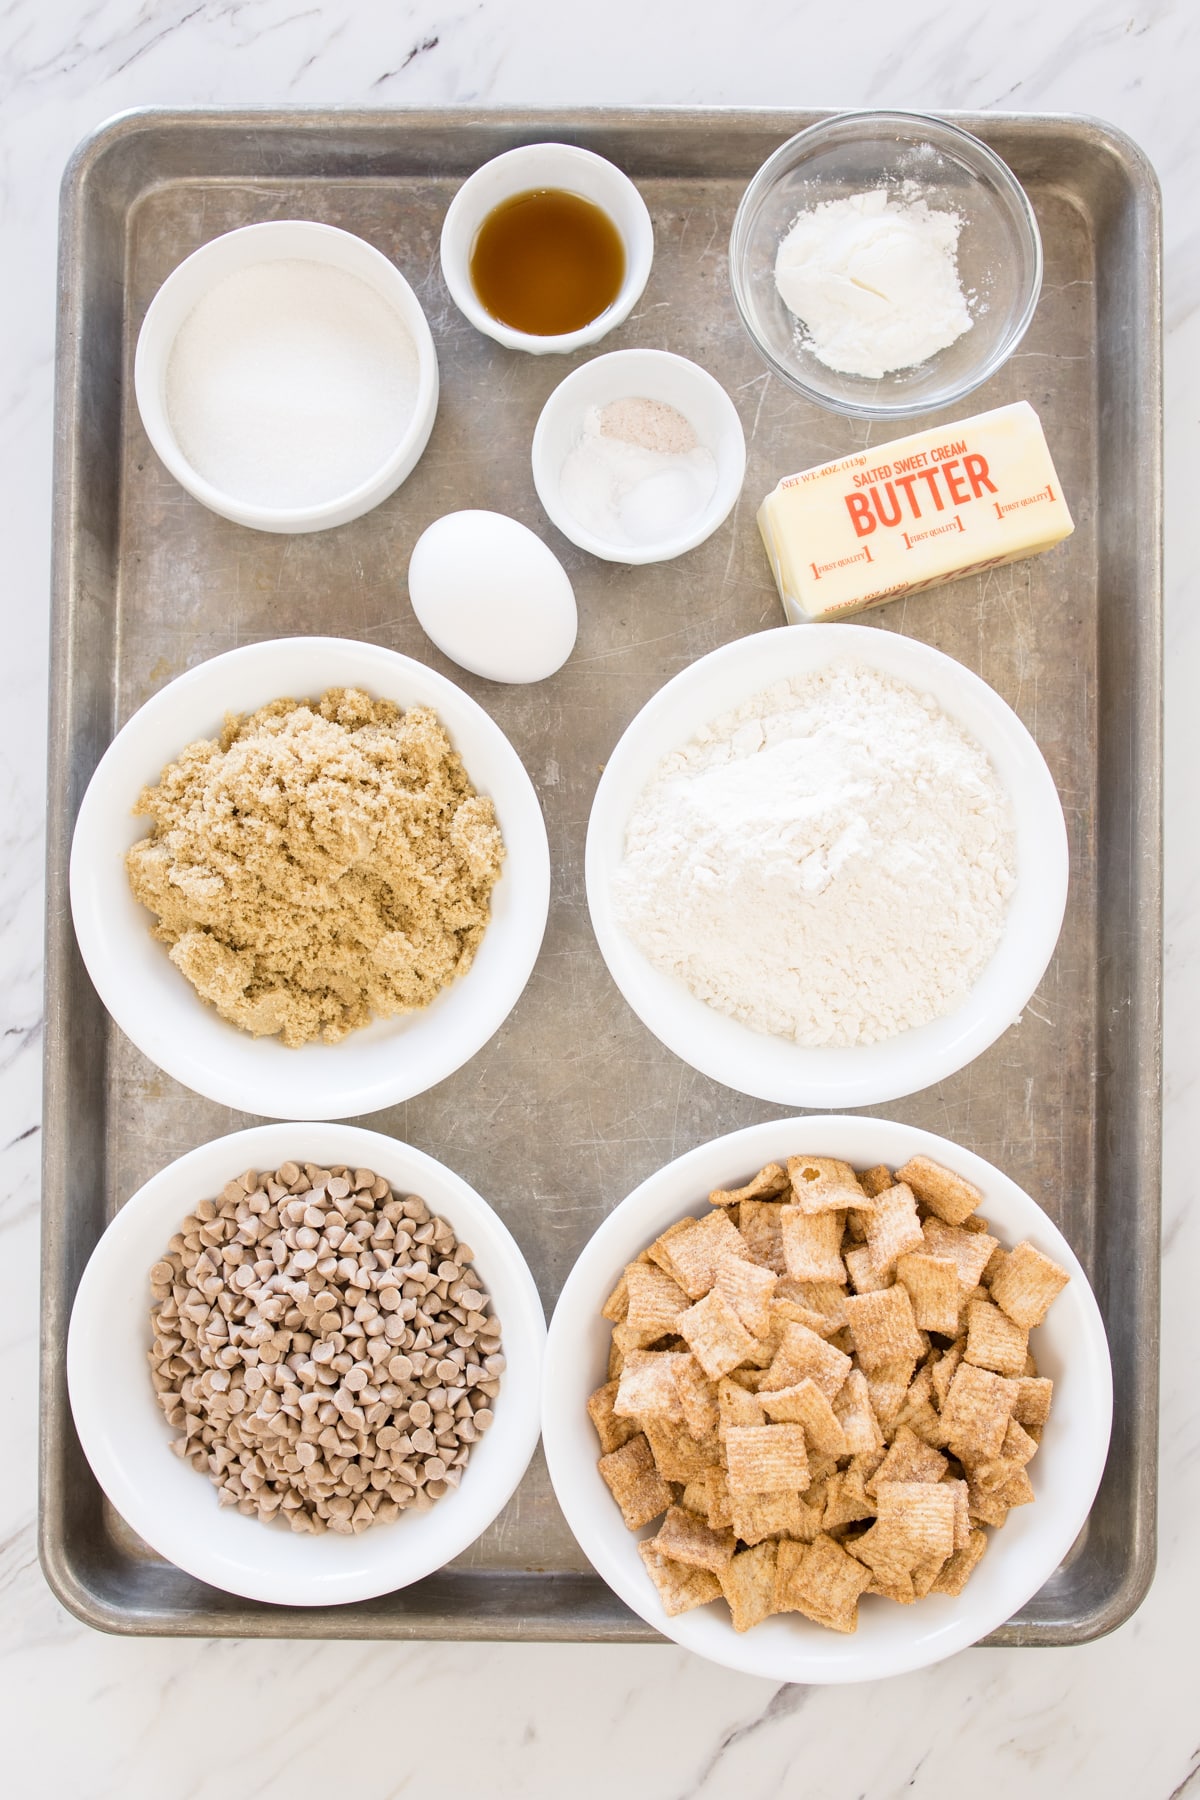 Top view of ingredients needed to make cinnamon toast crunch cookies in small bowls on a baking tray.